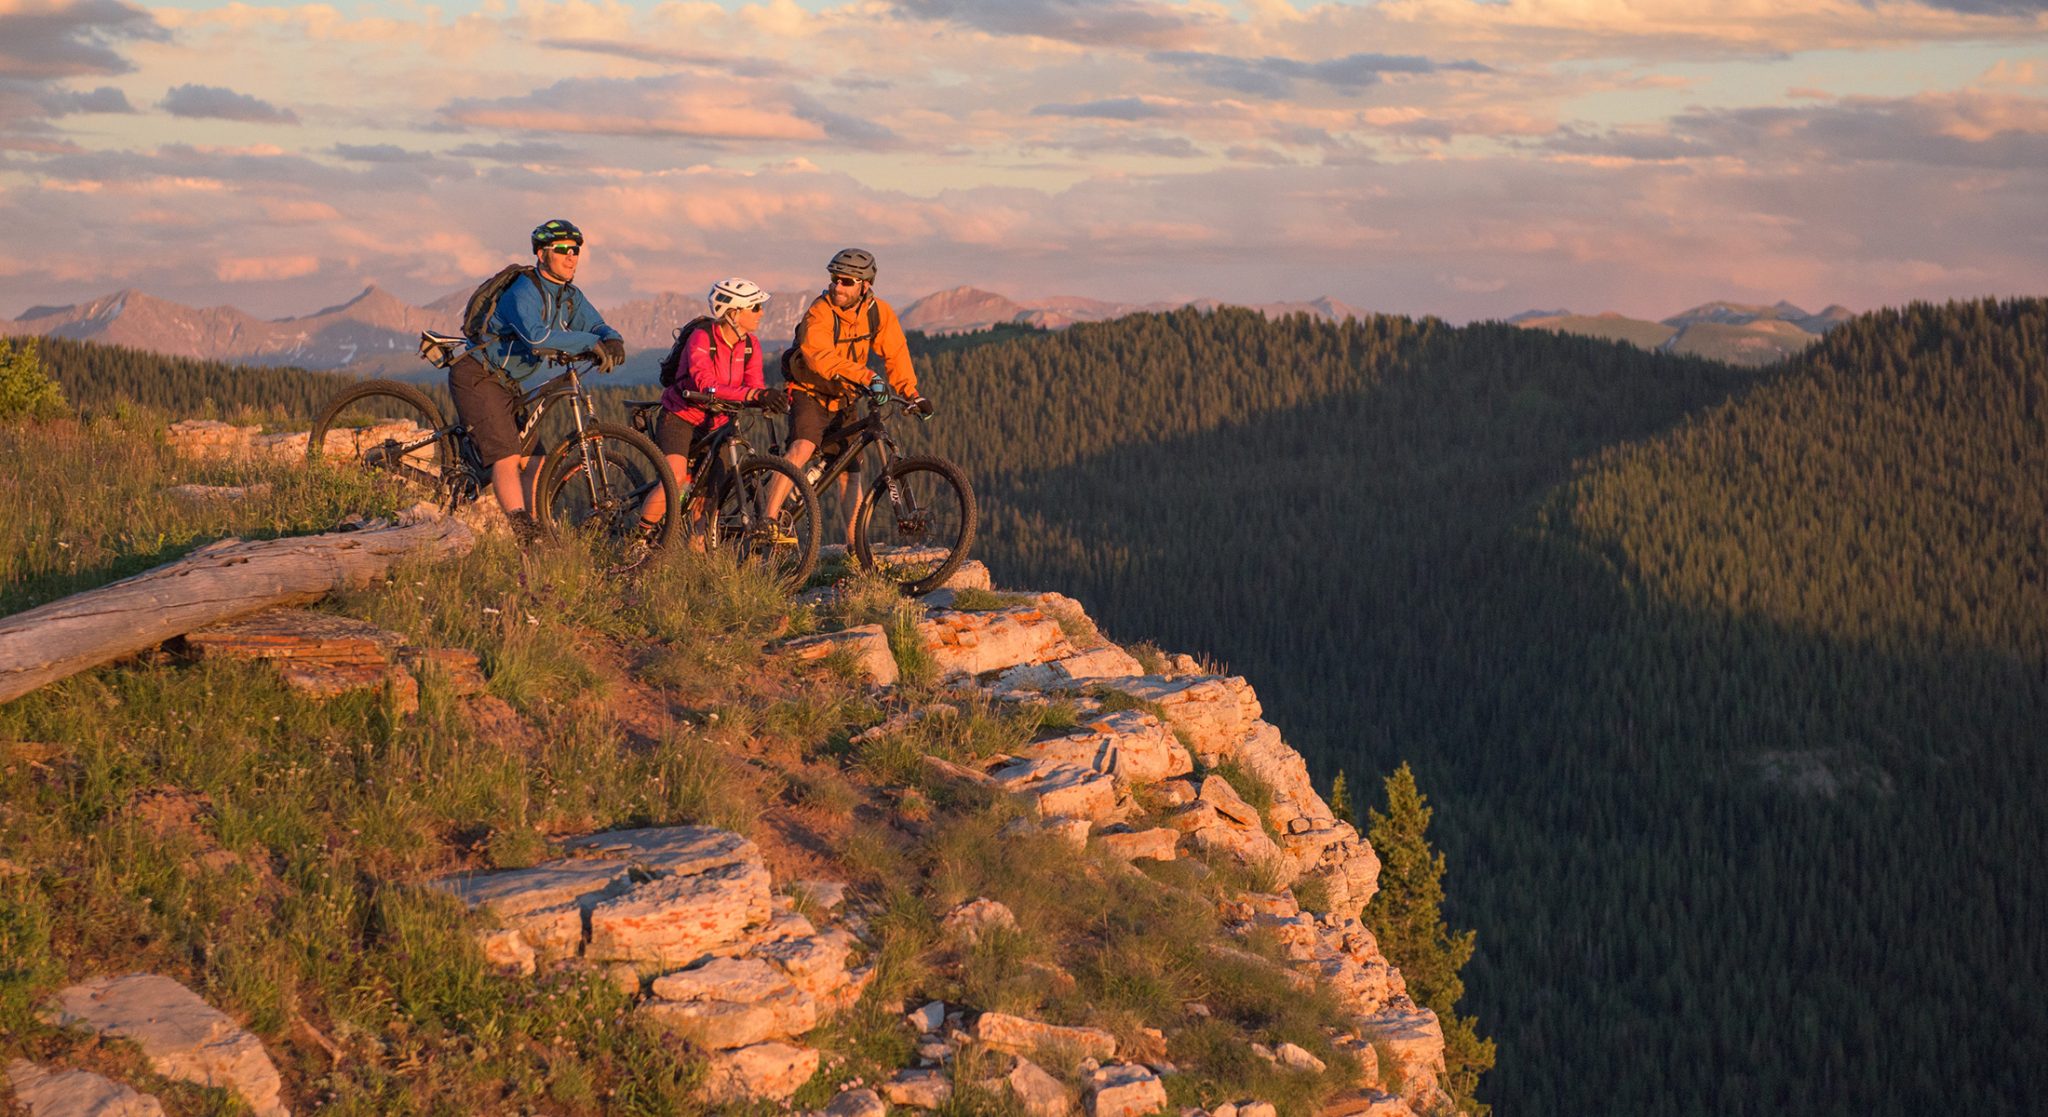 Three helmeted mountain bikers in colorful jackets pause on a rocky outcropping to chat with views of the Rocky Mountains and evergreen trees in the background.